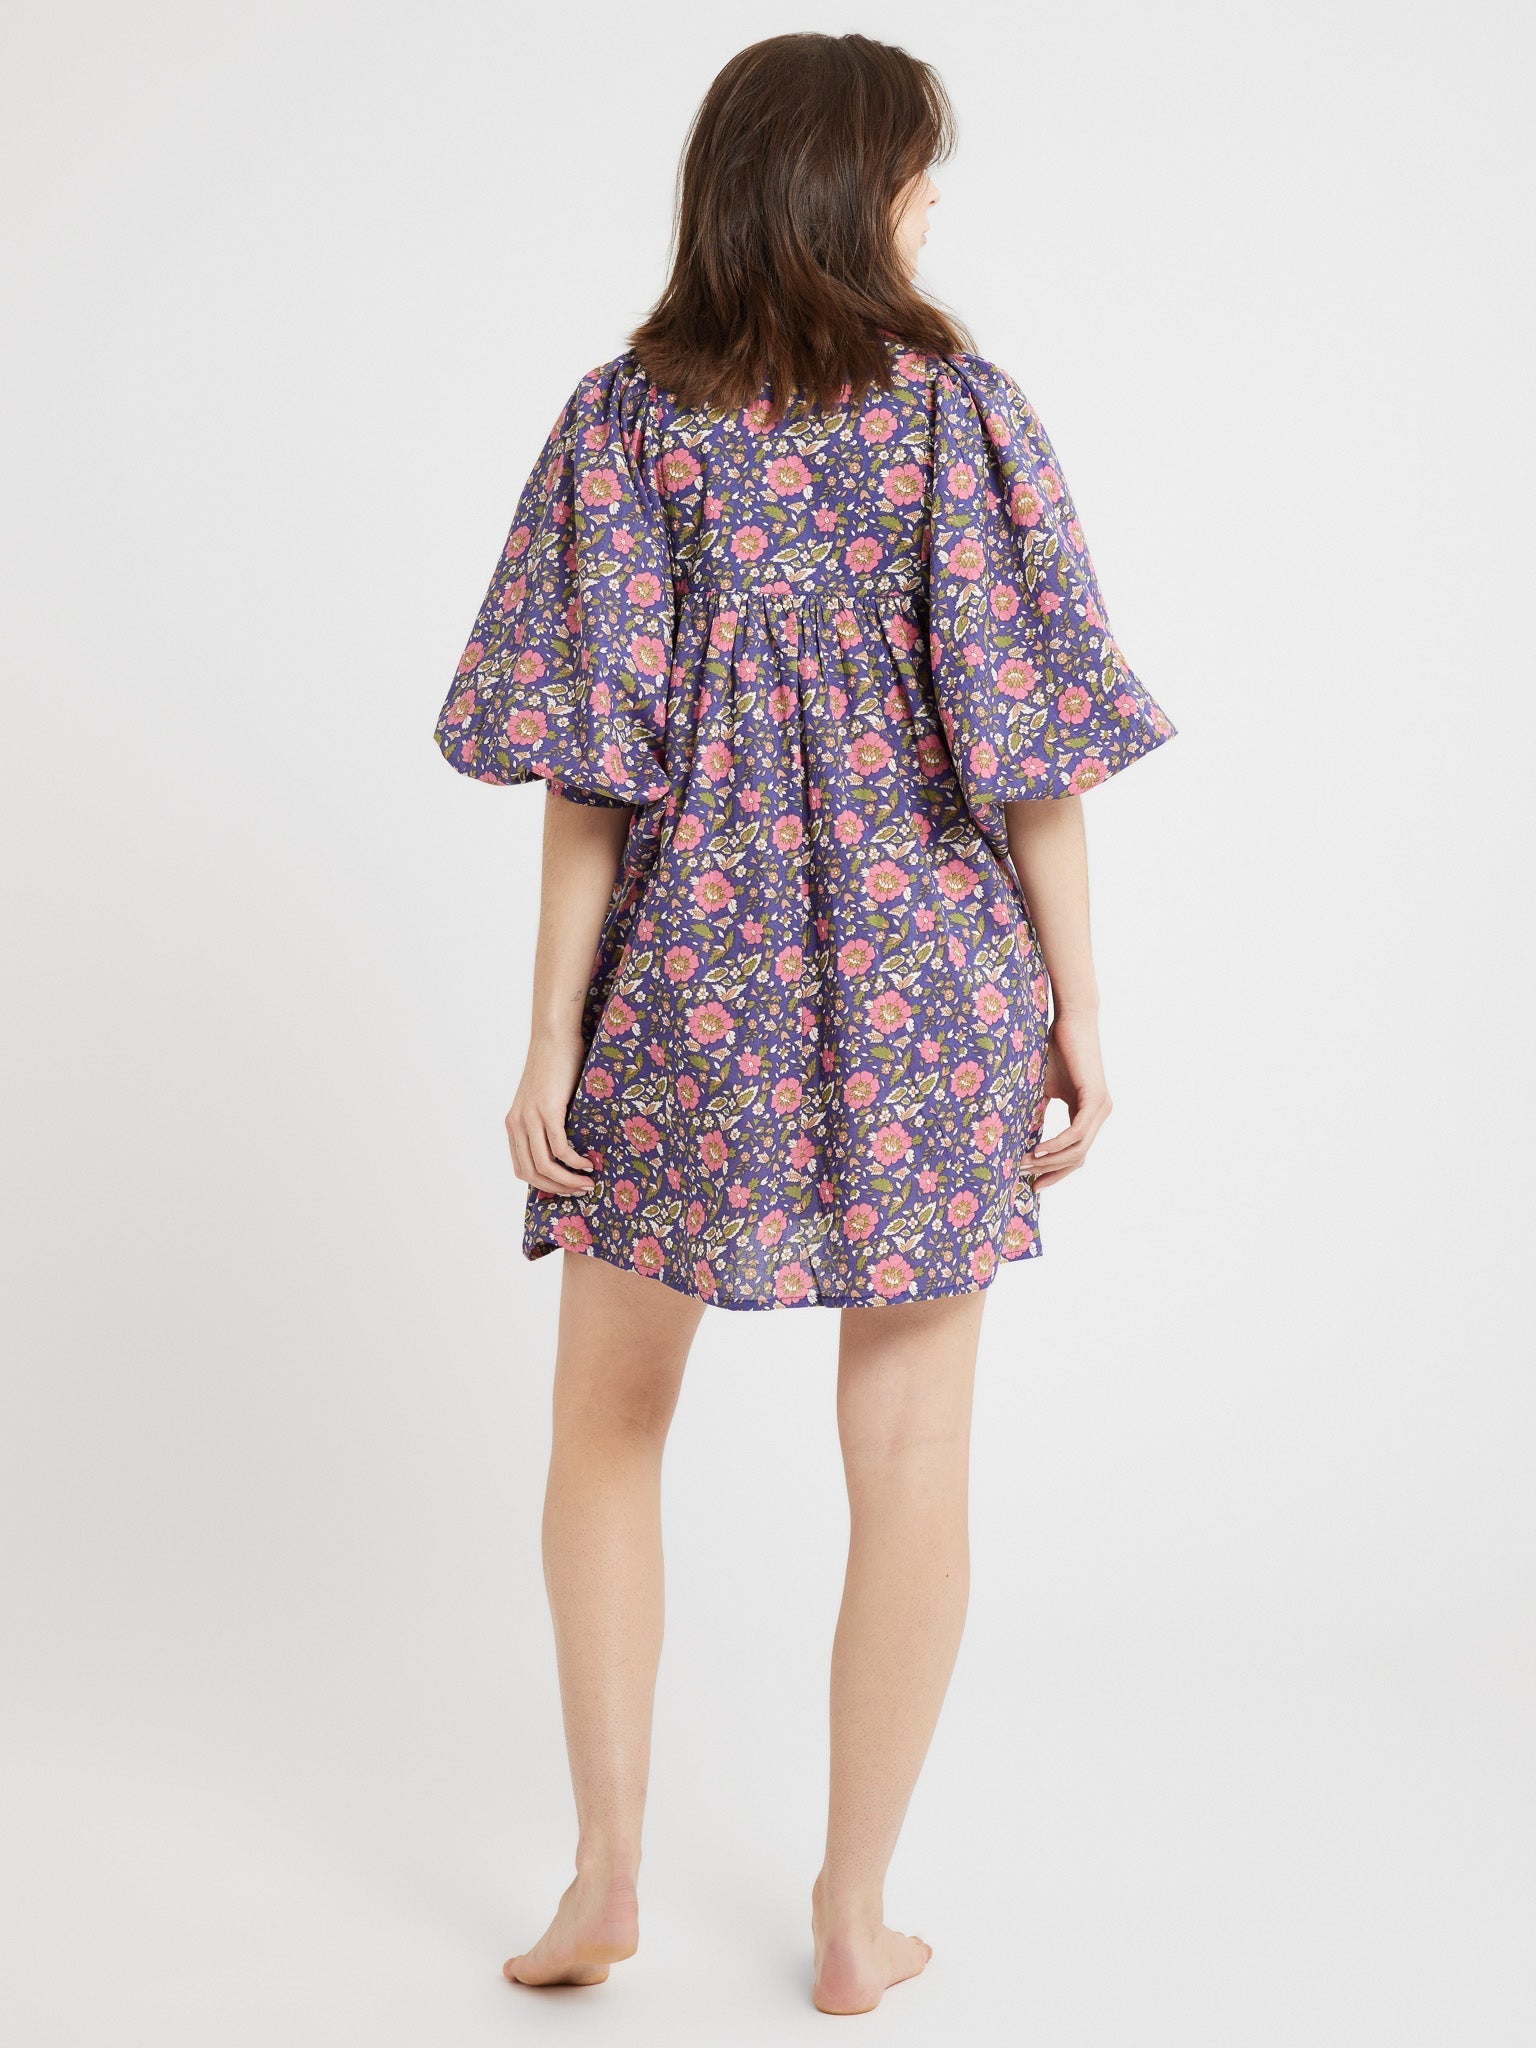 MILLE Clothing Daisy Dress in Primrose